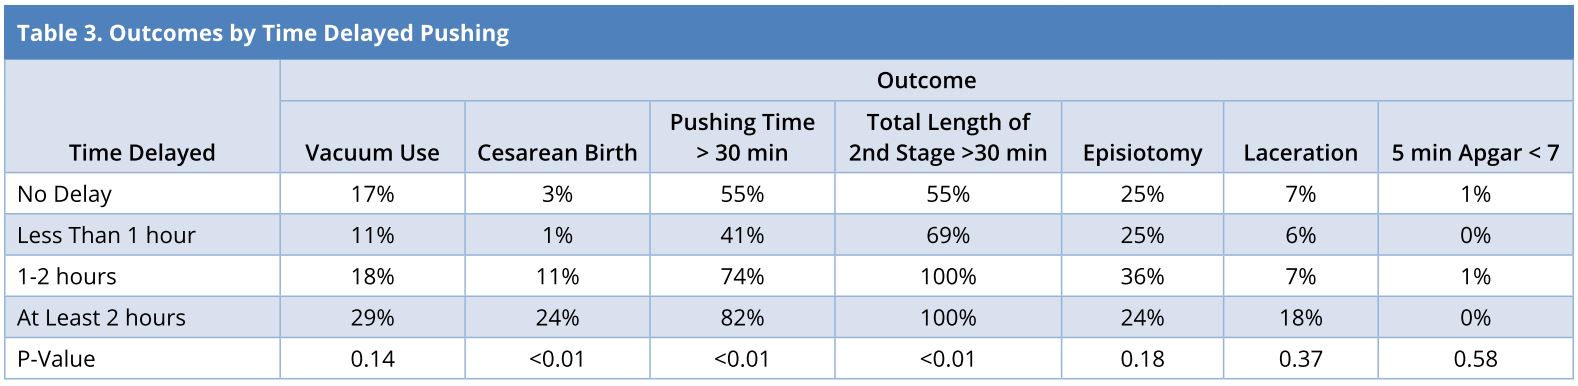 Table 3.JPGOutcomes by time delayed pushing.